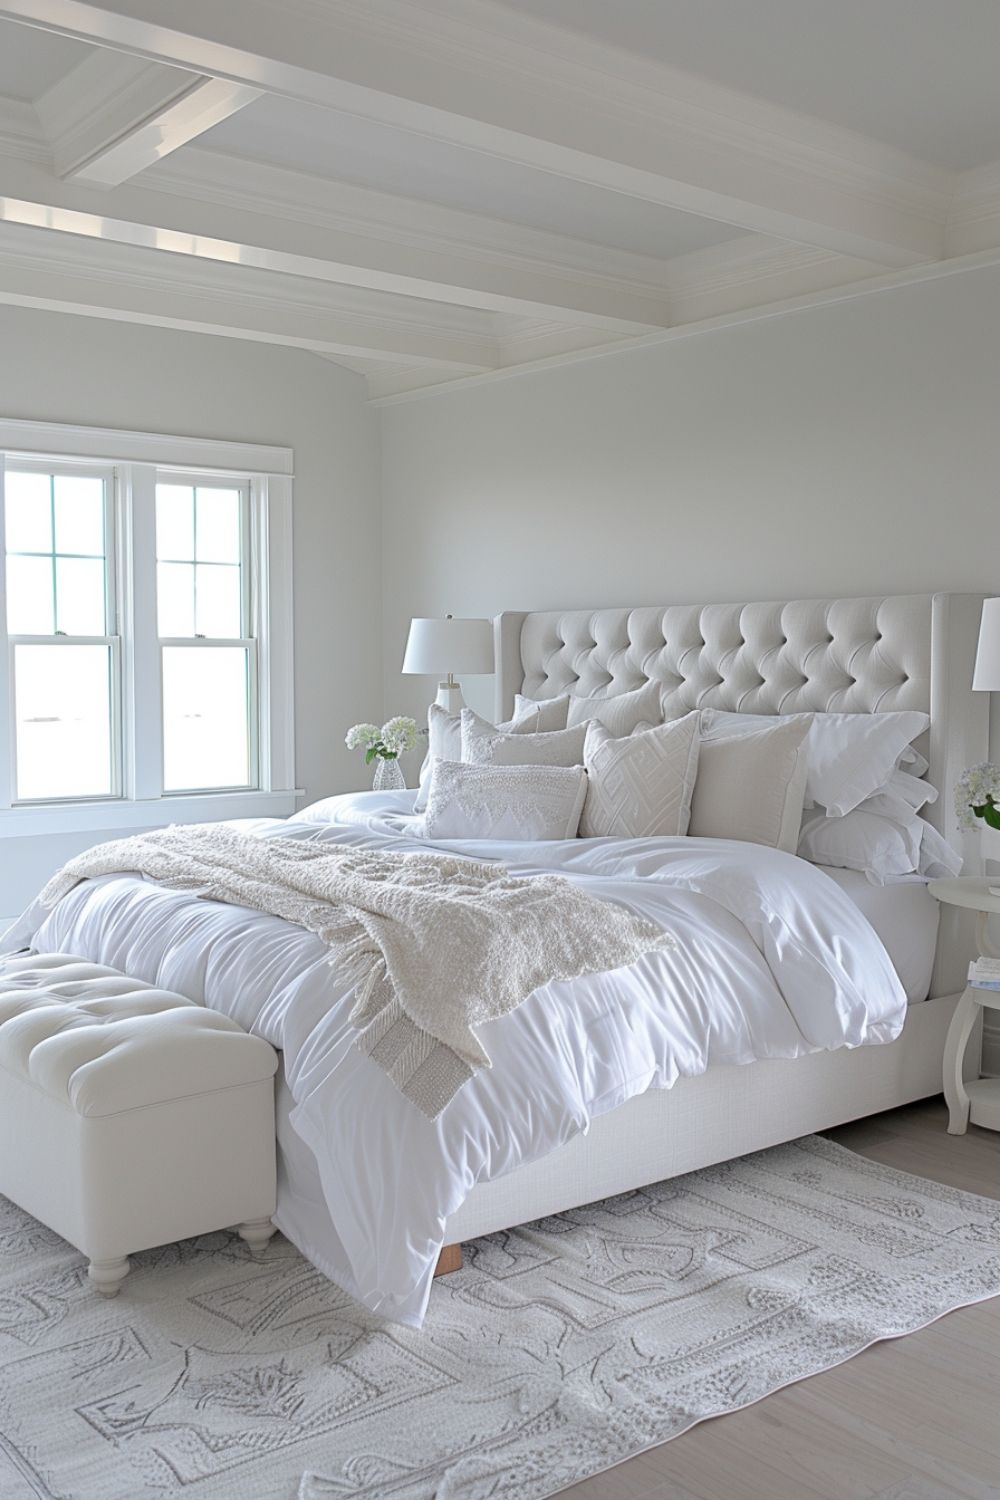 The Sleek and Chic: Modern White Bedroom Furniture Sets for a Clean and Contemporary Look